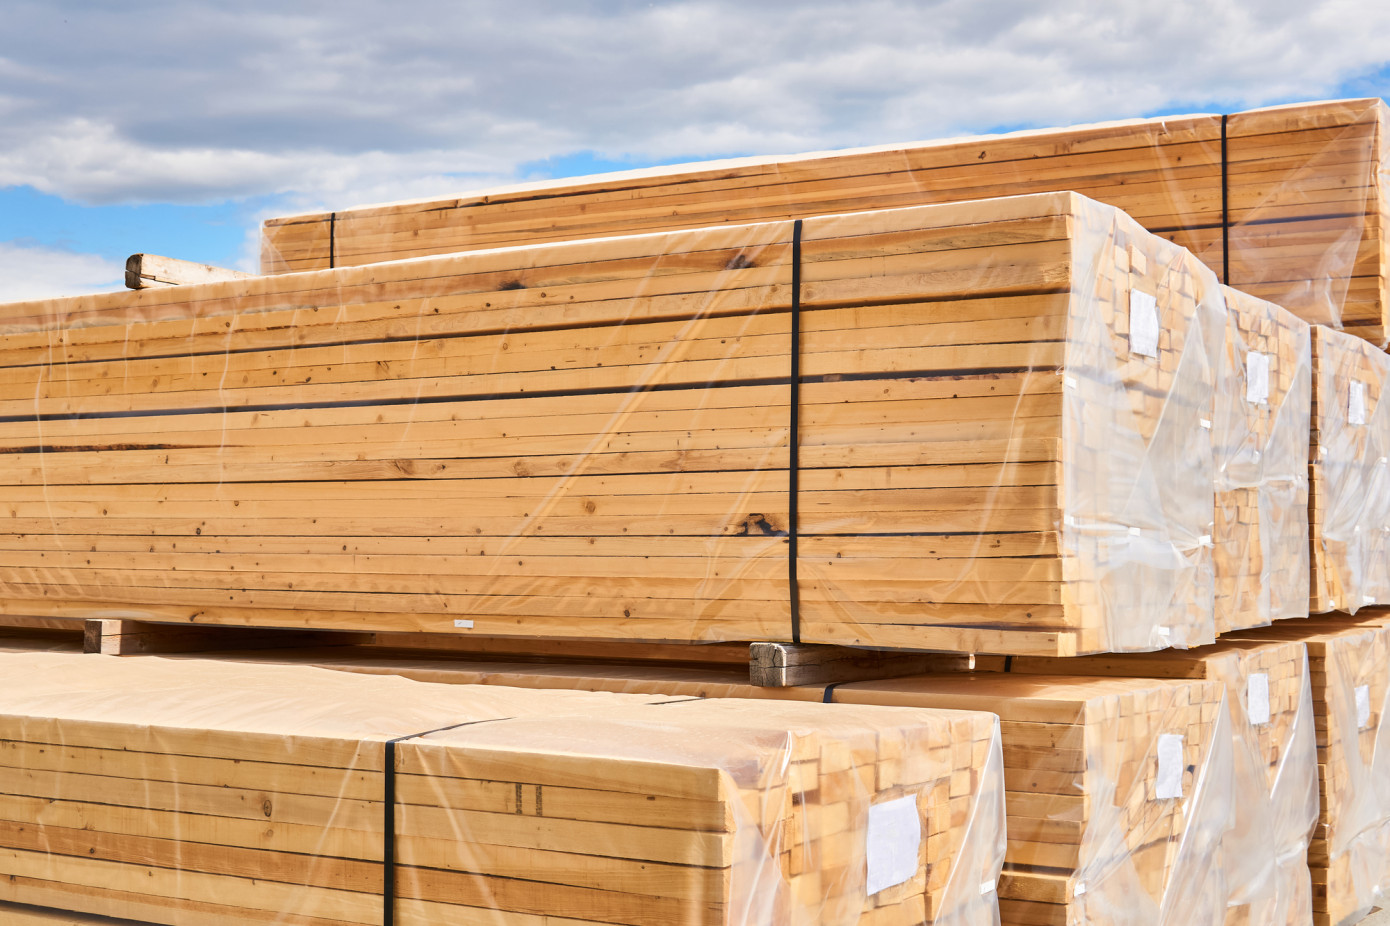 In March, Brazil increases 32% softwood lumber exports to US